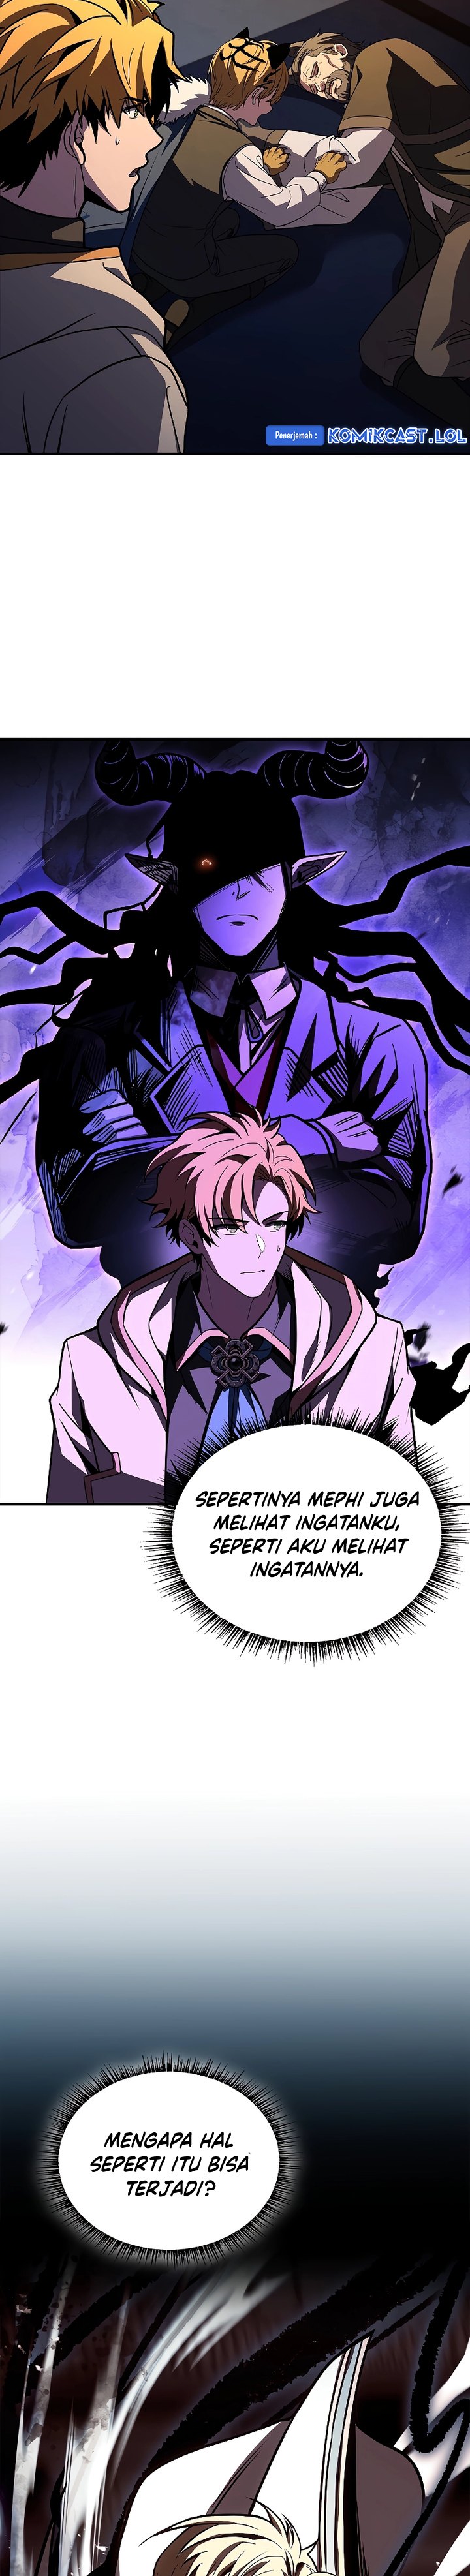 Talent-swallowing Magician Chapter 69